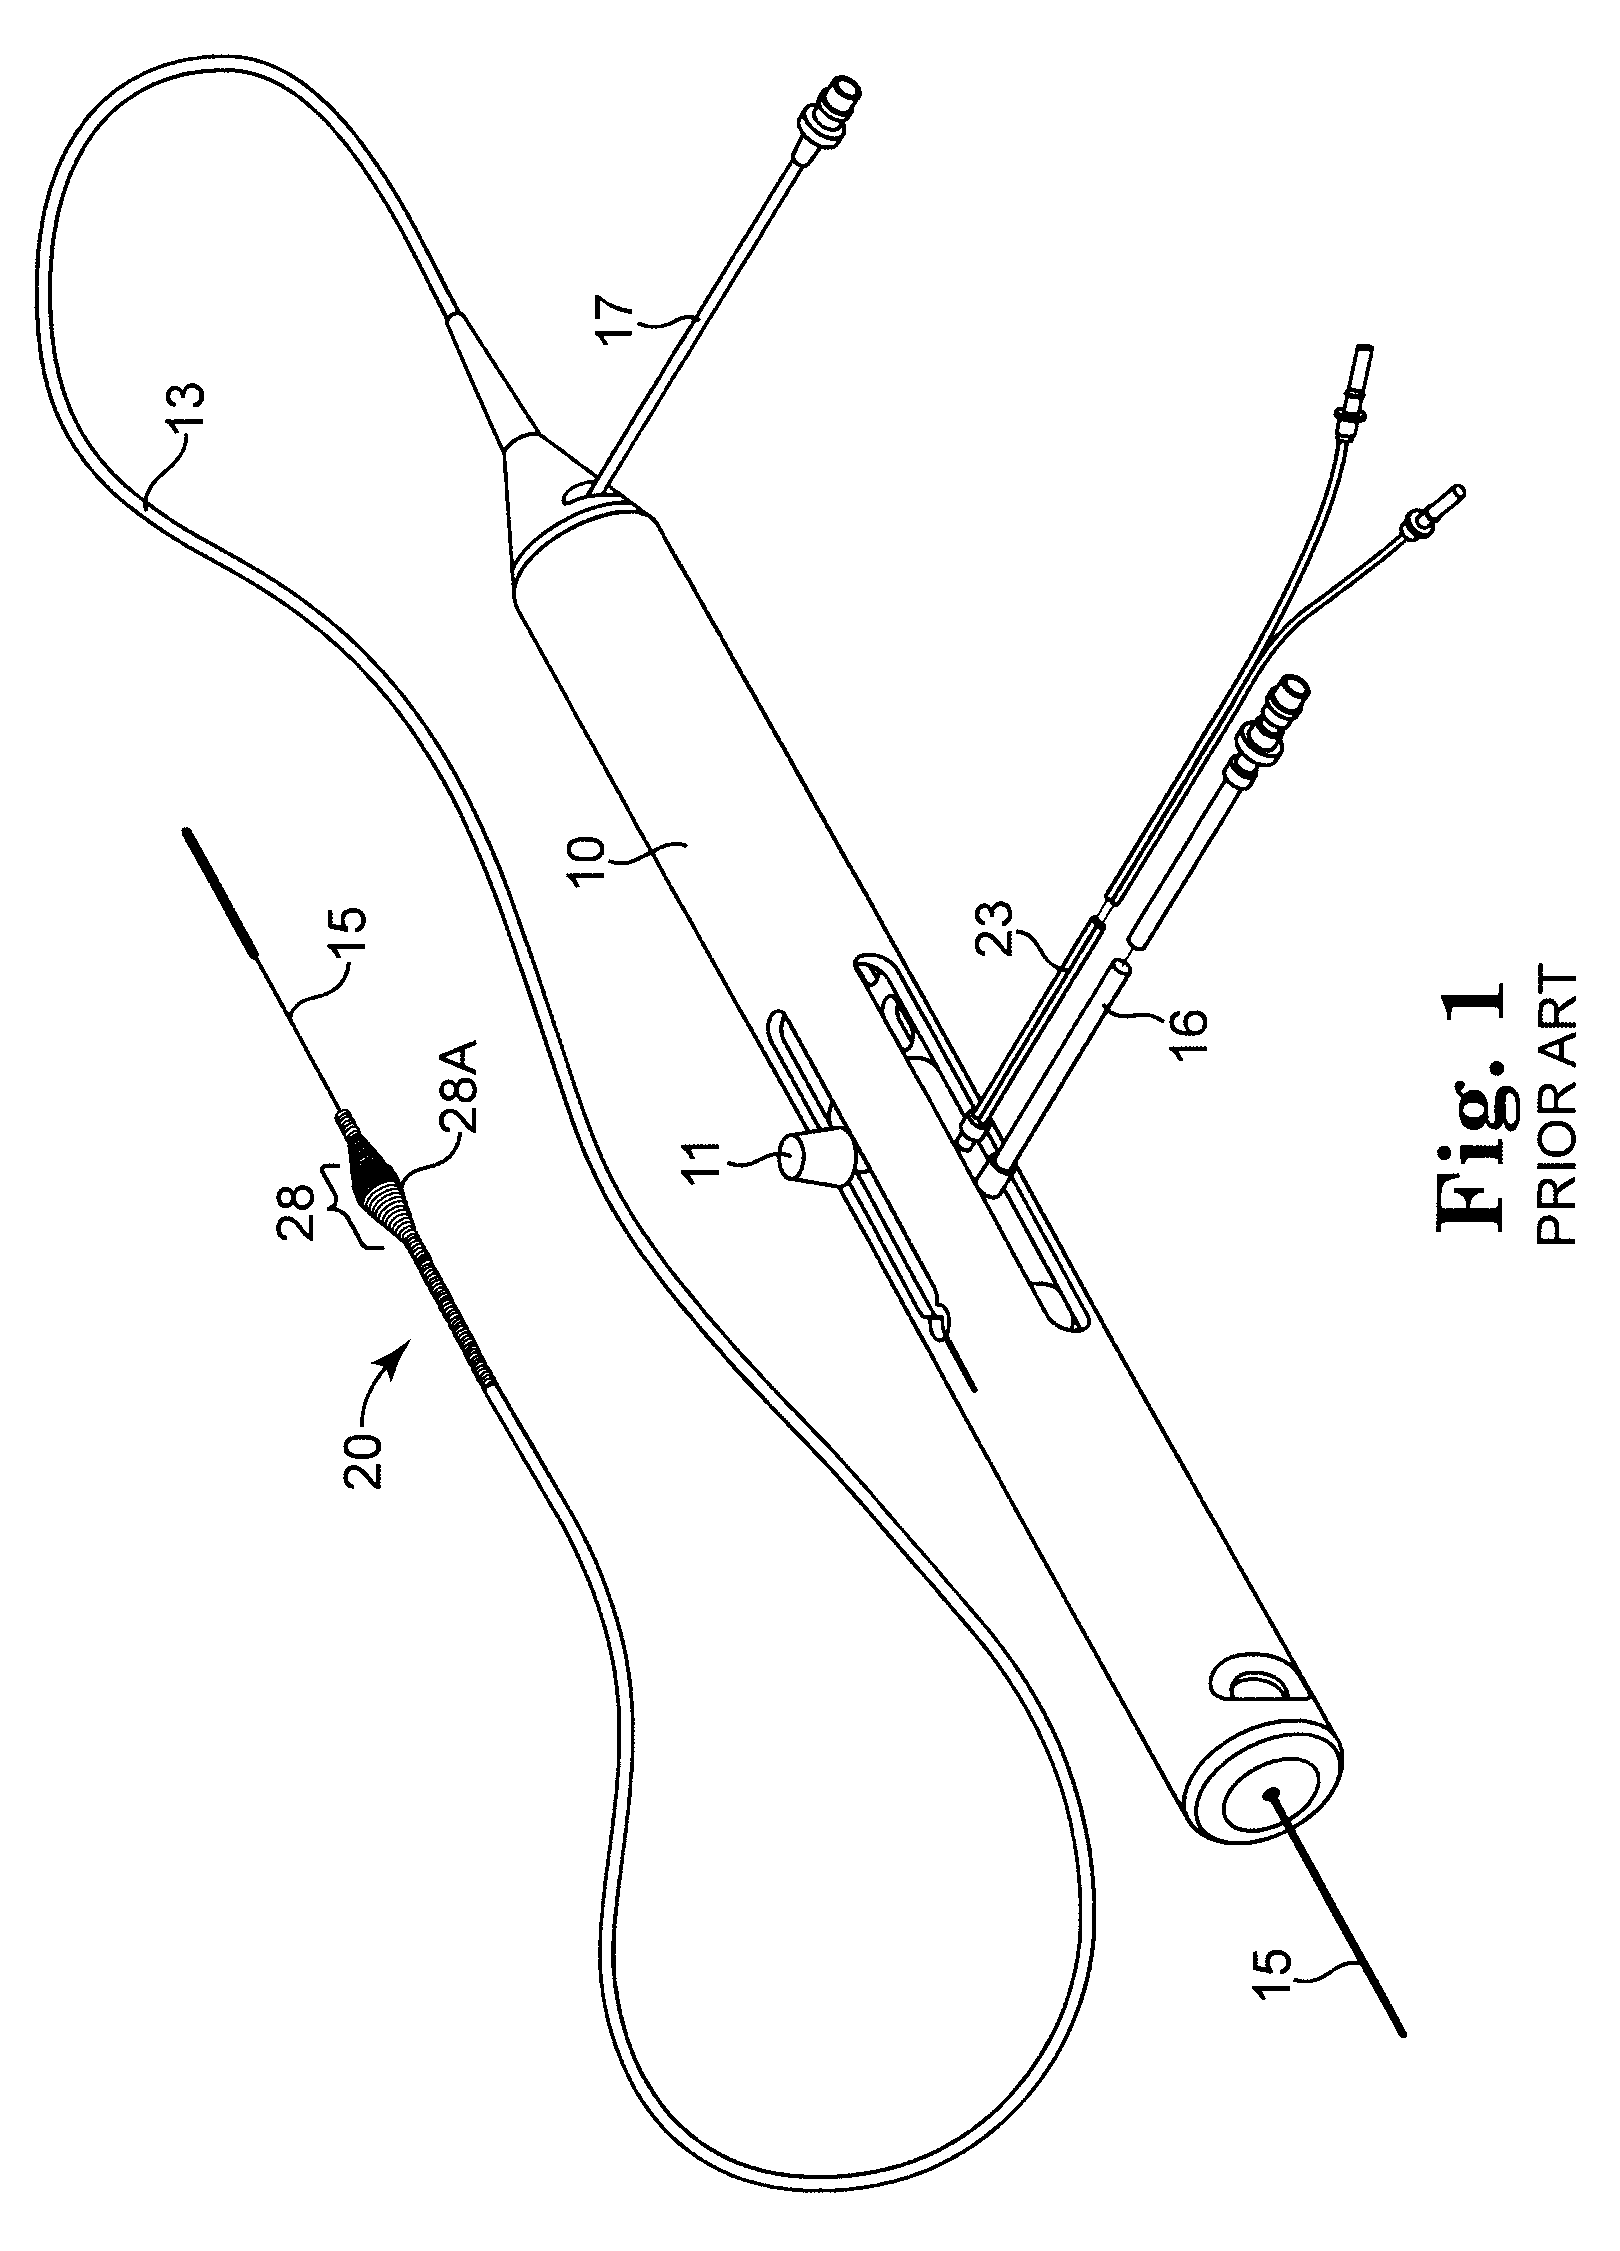 Method and apparatus for increasing rotational amplitude of abrasive element on high-speed rotational atherectomy device